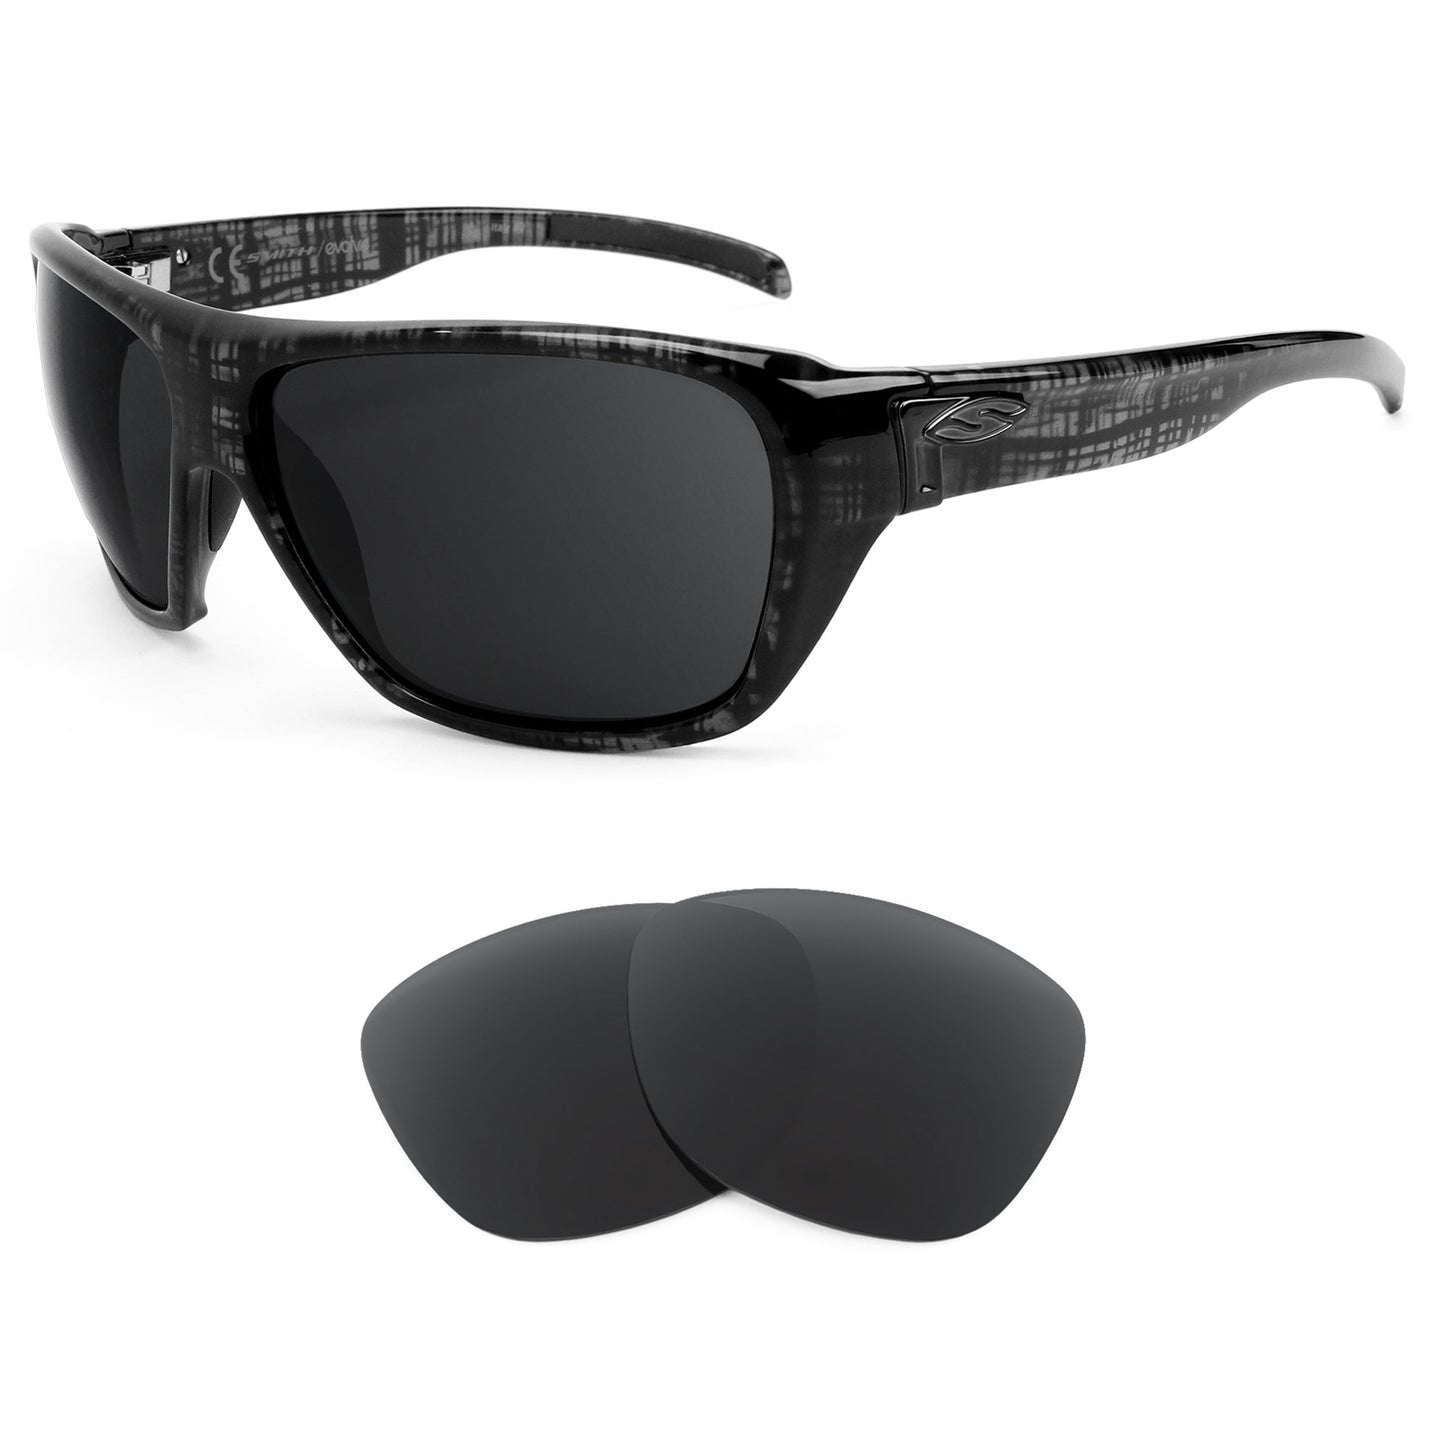 Smith Chief sunglasses with replacement lenses